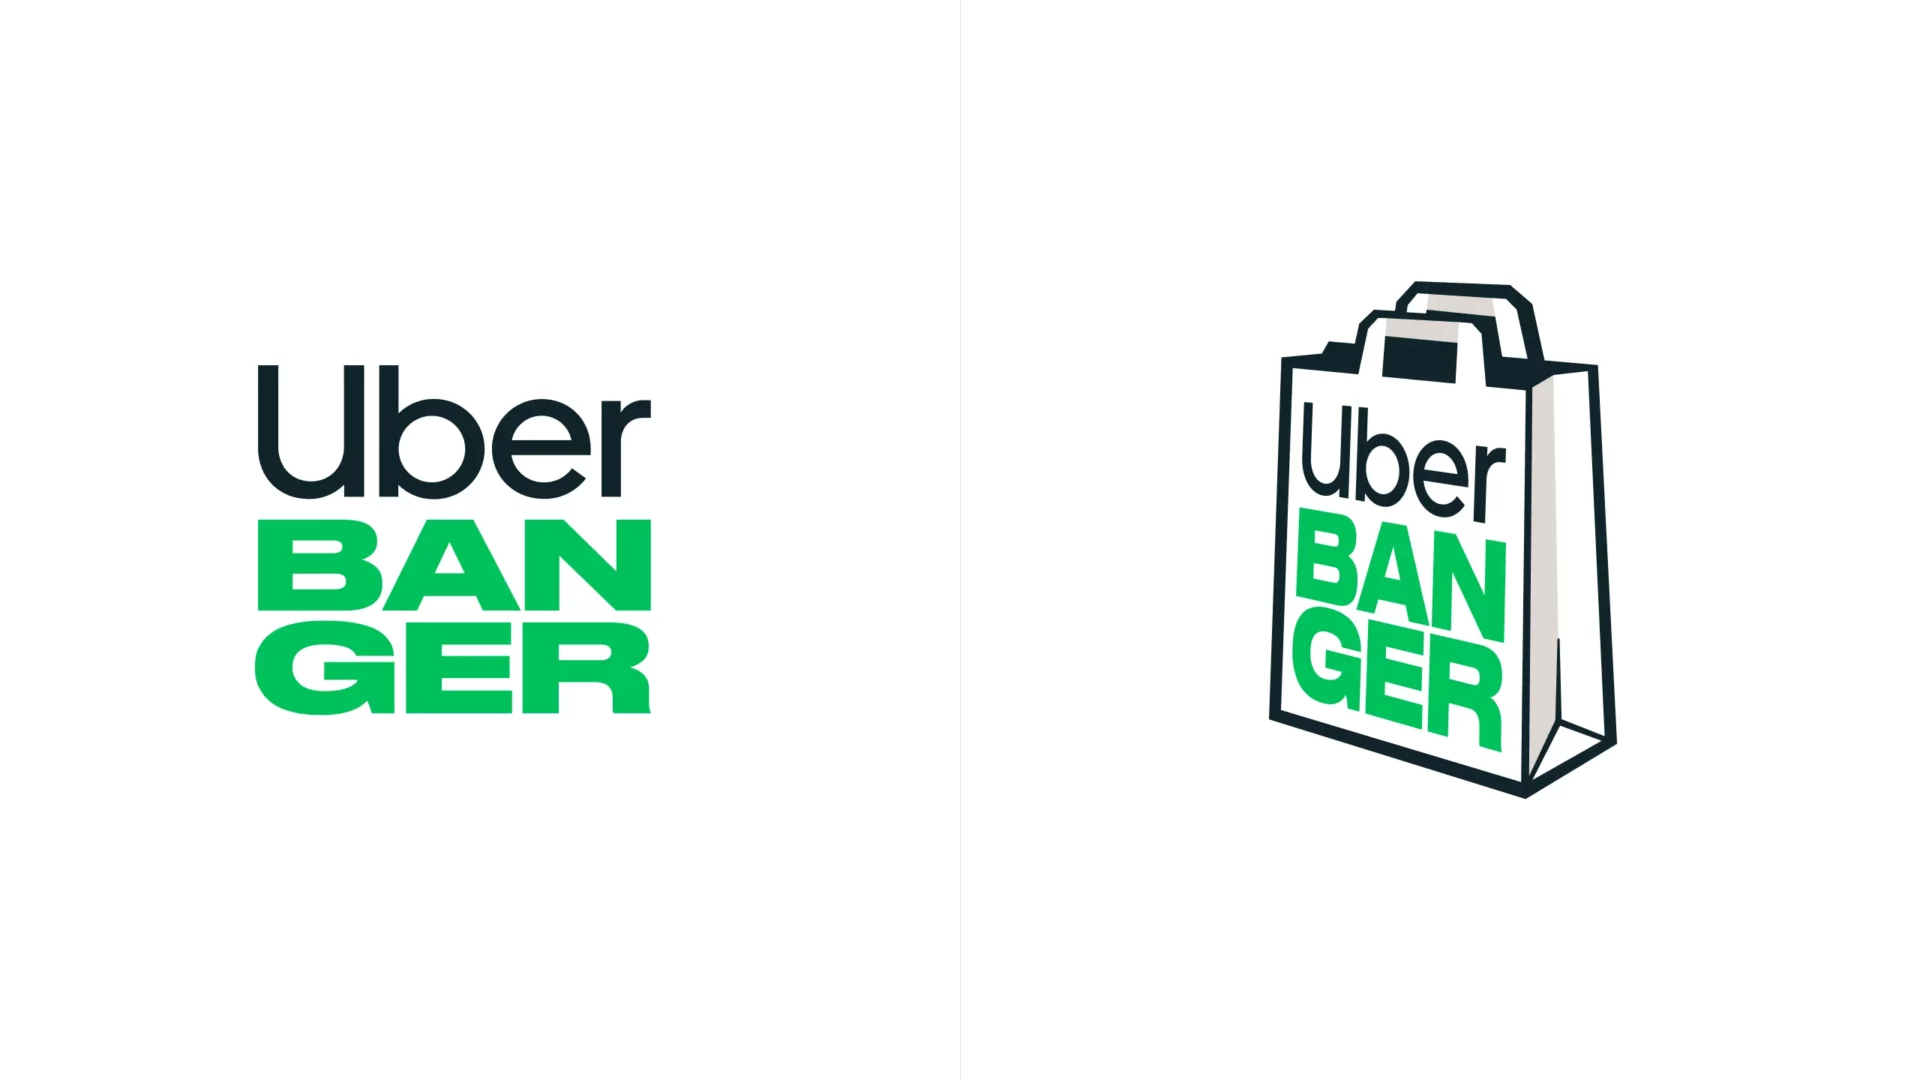 Both normal and illustrated version of the Uber Banger logo